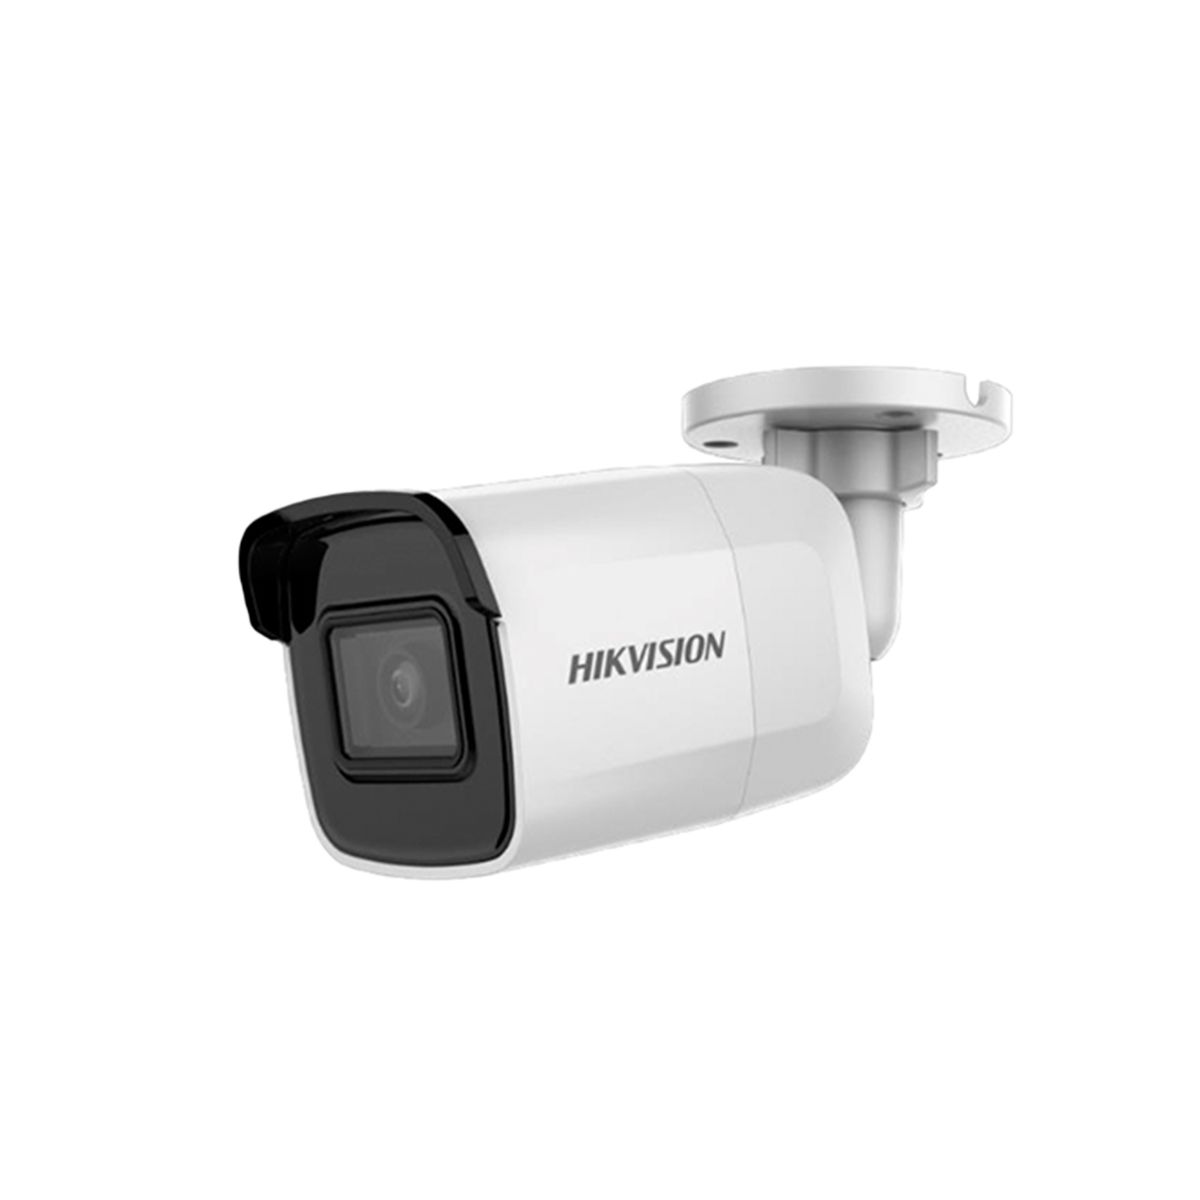 Cámaras IP WiFi Hikvision Tipo Bullet DS-2CD2021G1-IW DS-2CD2021G1-IW